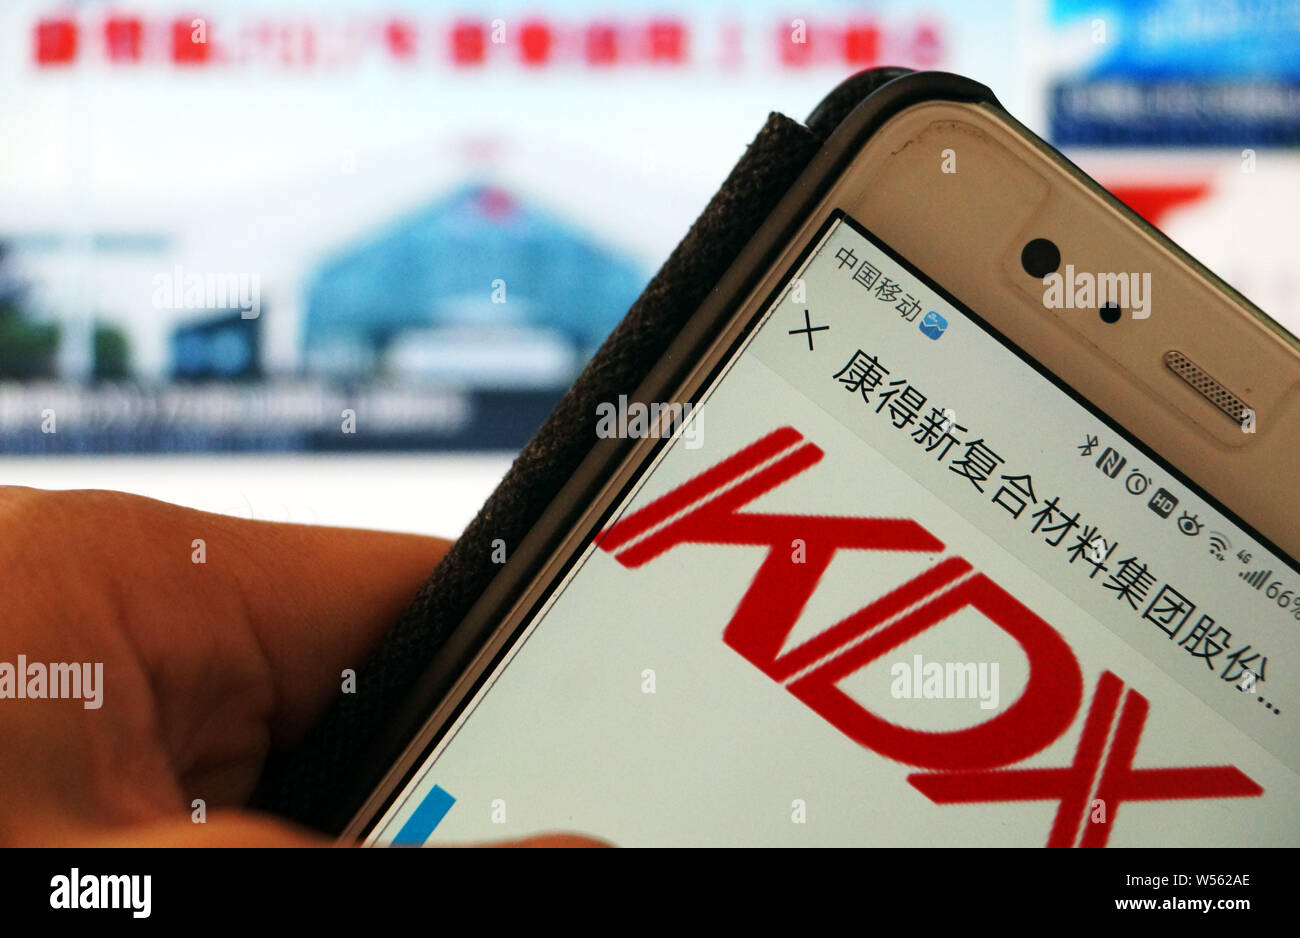 --FILE--A Chinese mobile phone user looks at a logo of Shenzhen-listed Kangdexin Composite Material Group Co. Ltd. on his smartphone in Tianjin, China Stock Photo